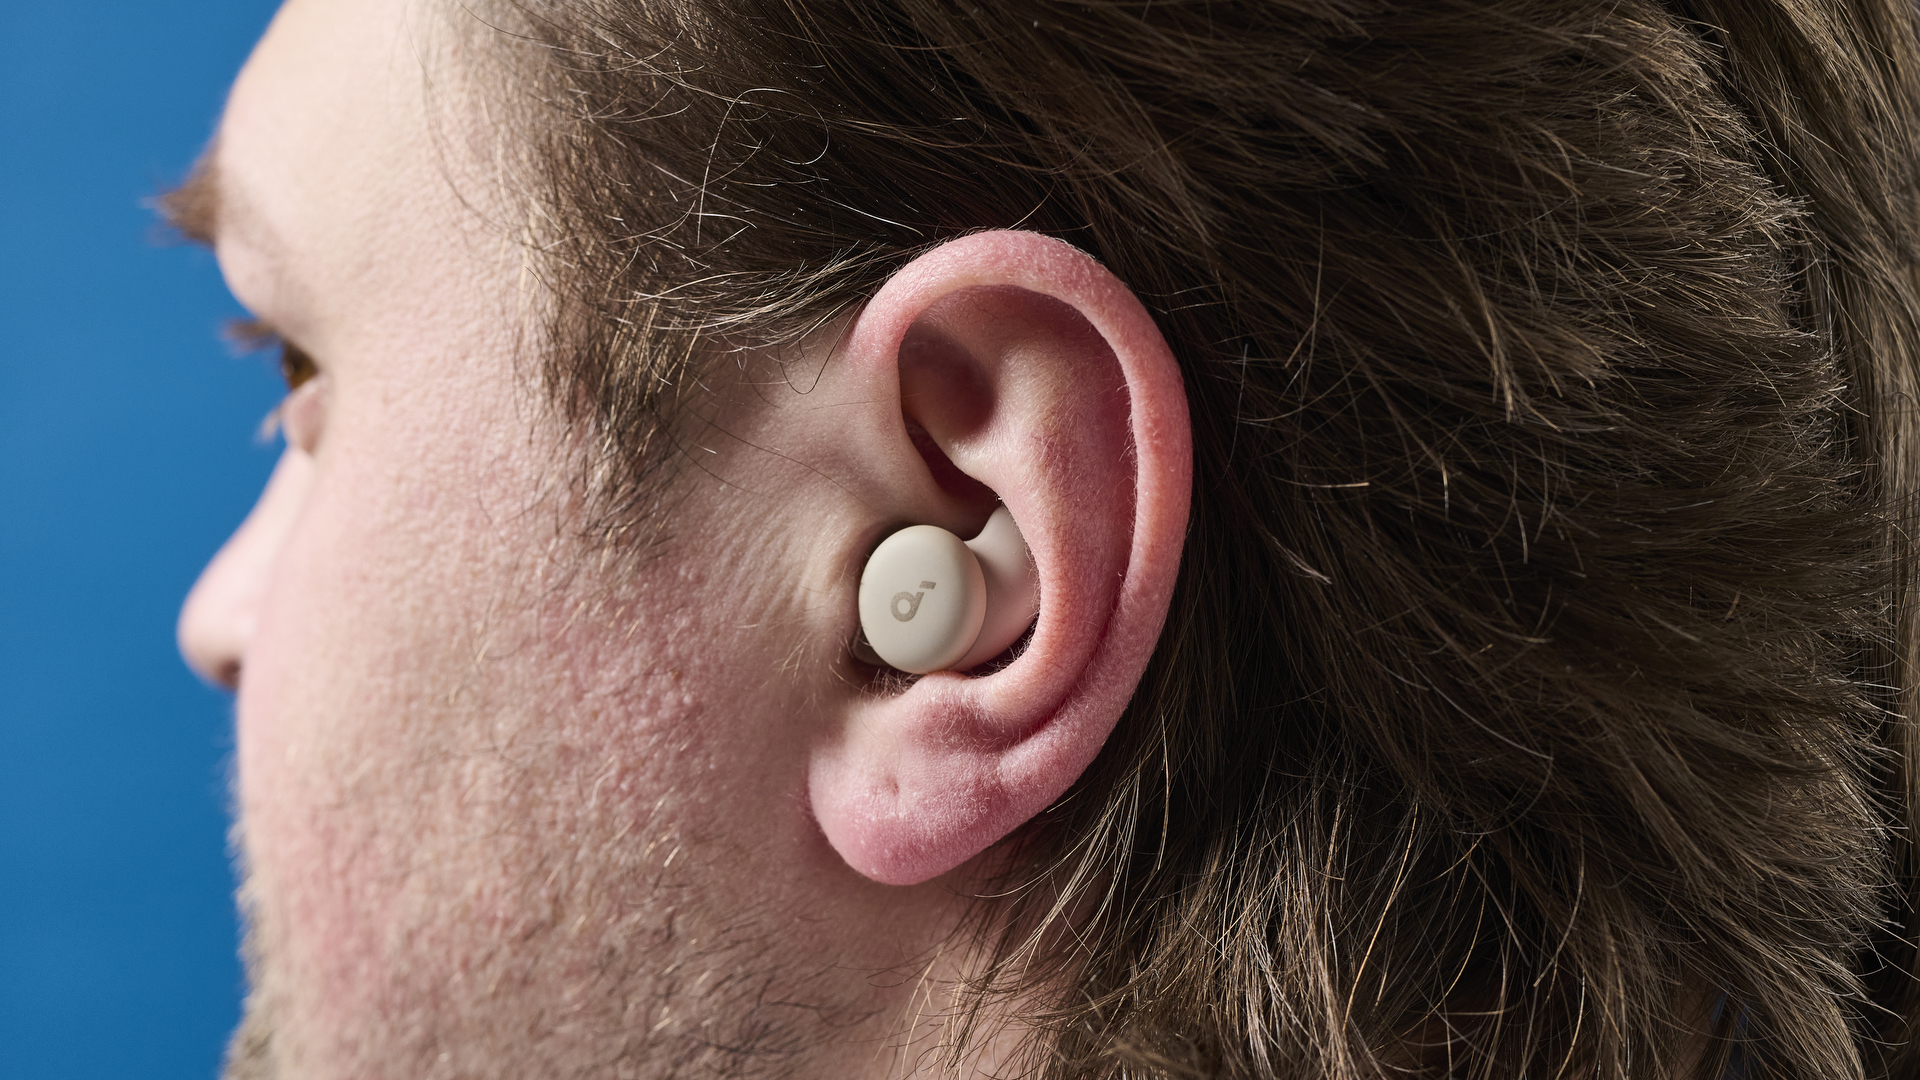 A photo of the Soundcore Sleep A20 earbuds in ear.